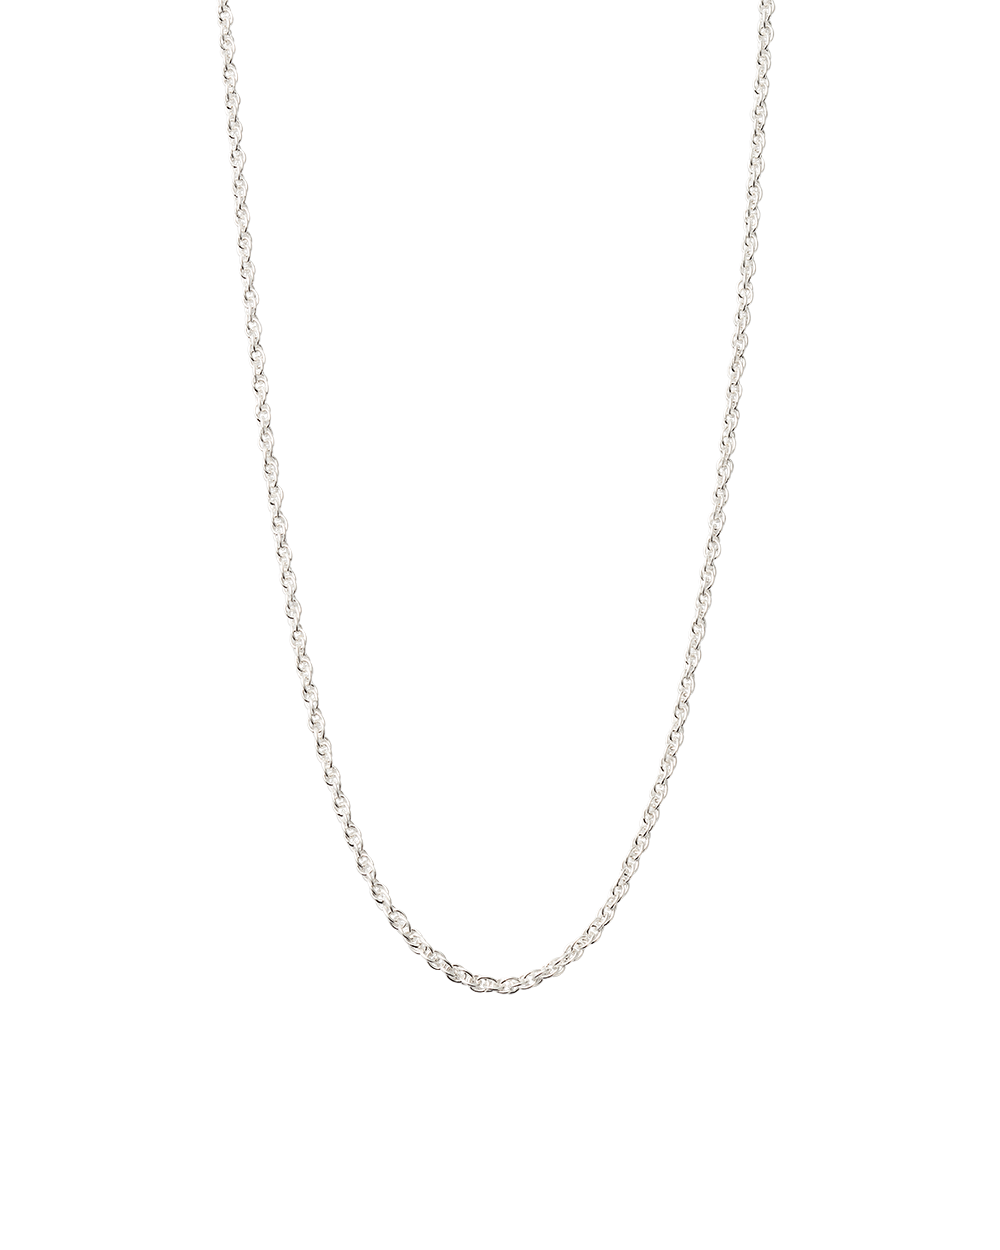 ROPE CHOKER 14-16" (STERLING SILVER) - IMAGE 1